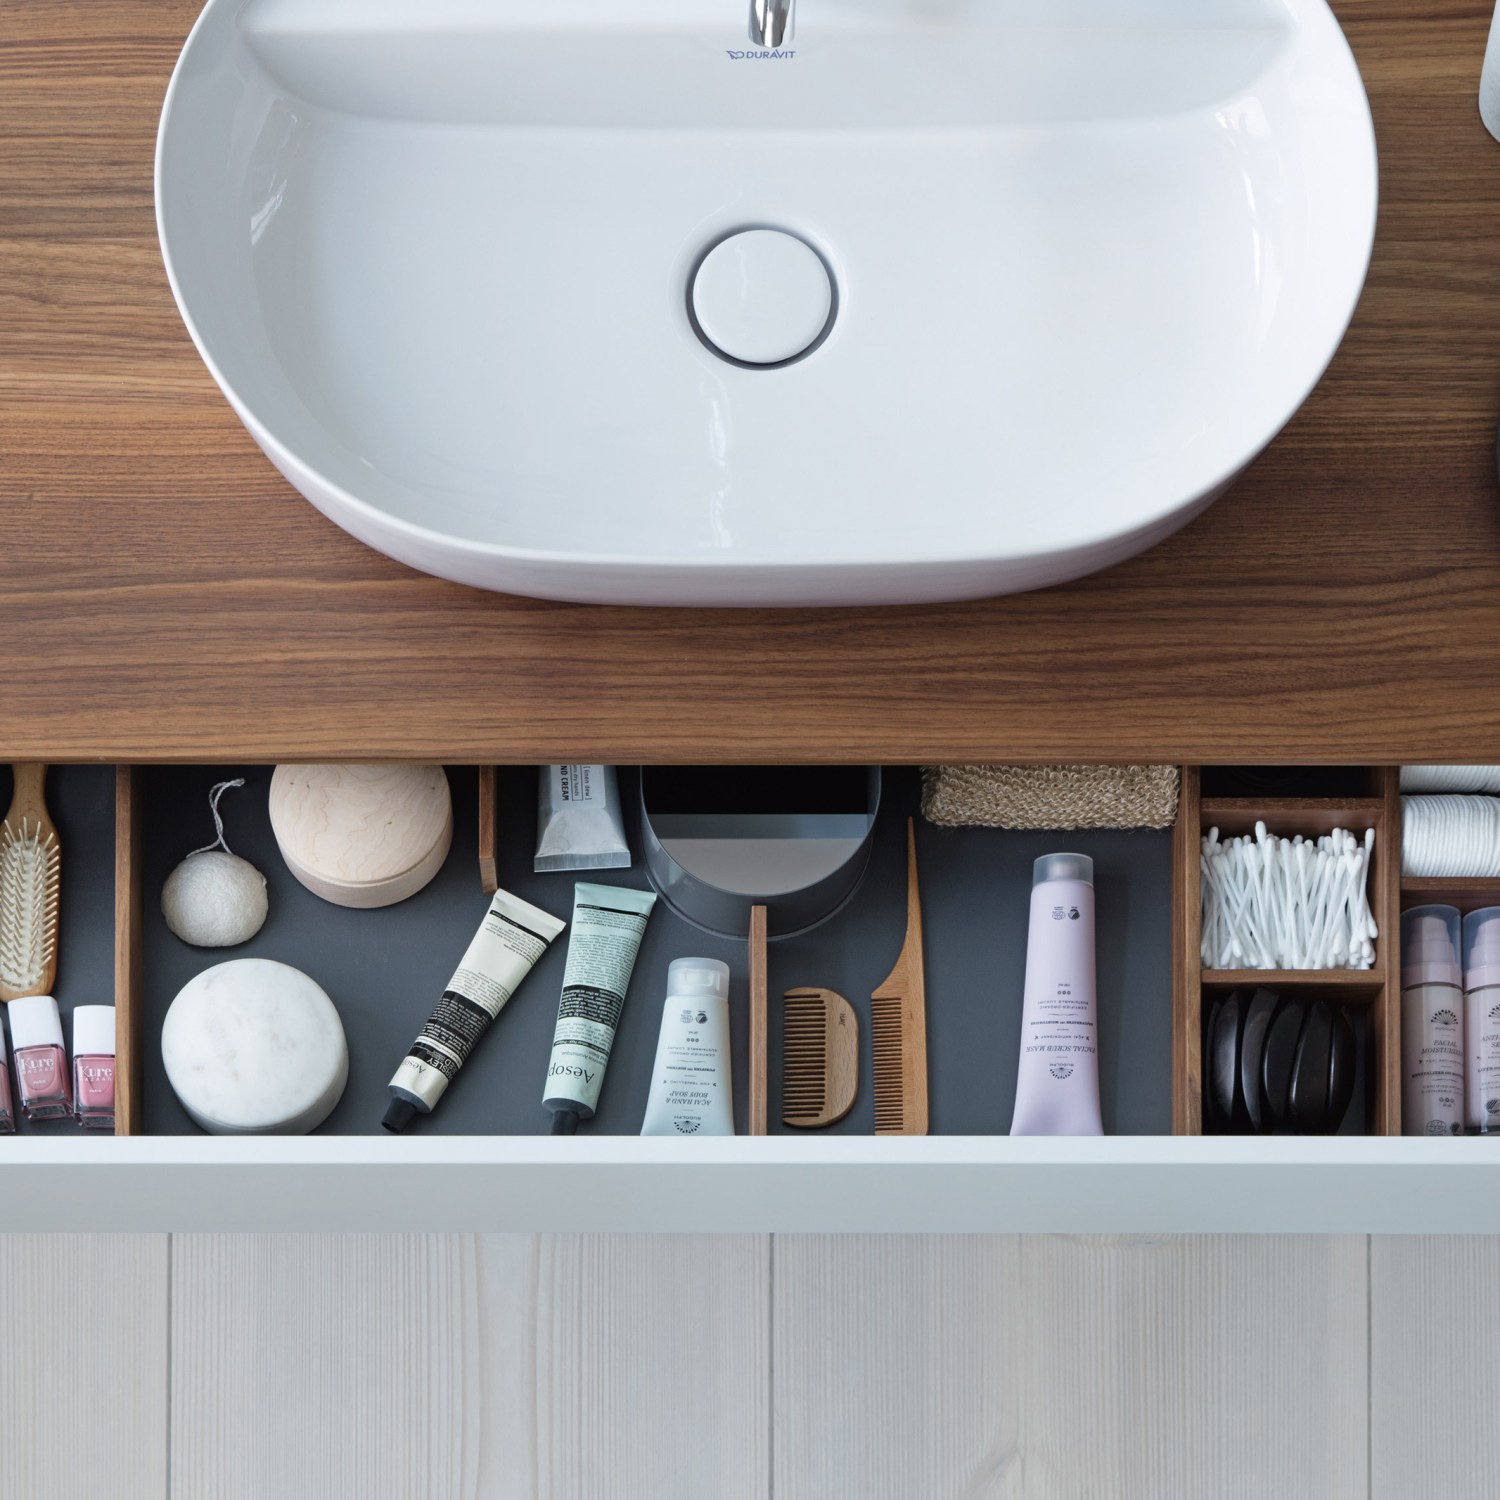 An overhead view of a bathroom sink and open drawer